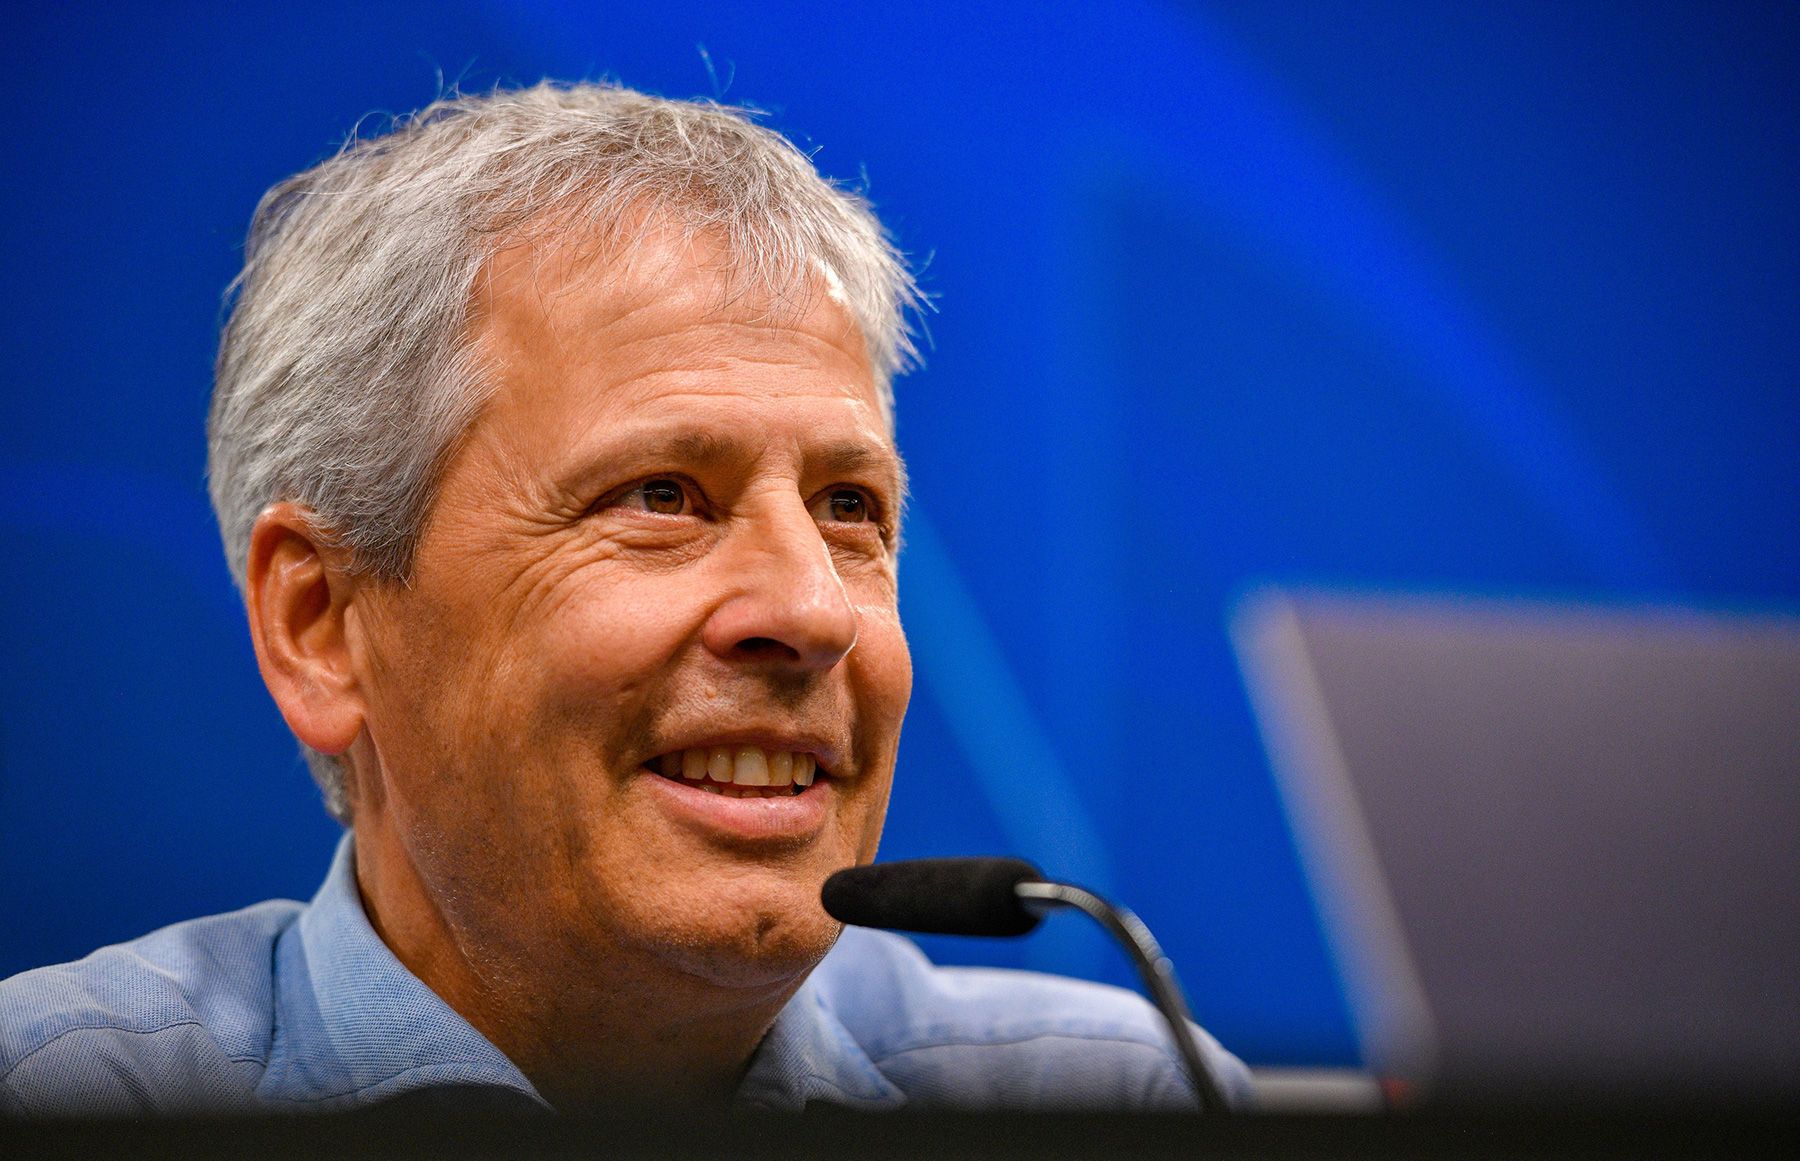 Lucien Favre in press conference before the Champions